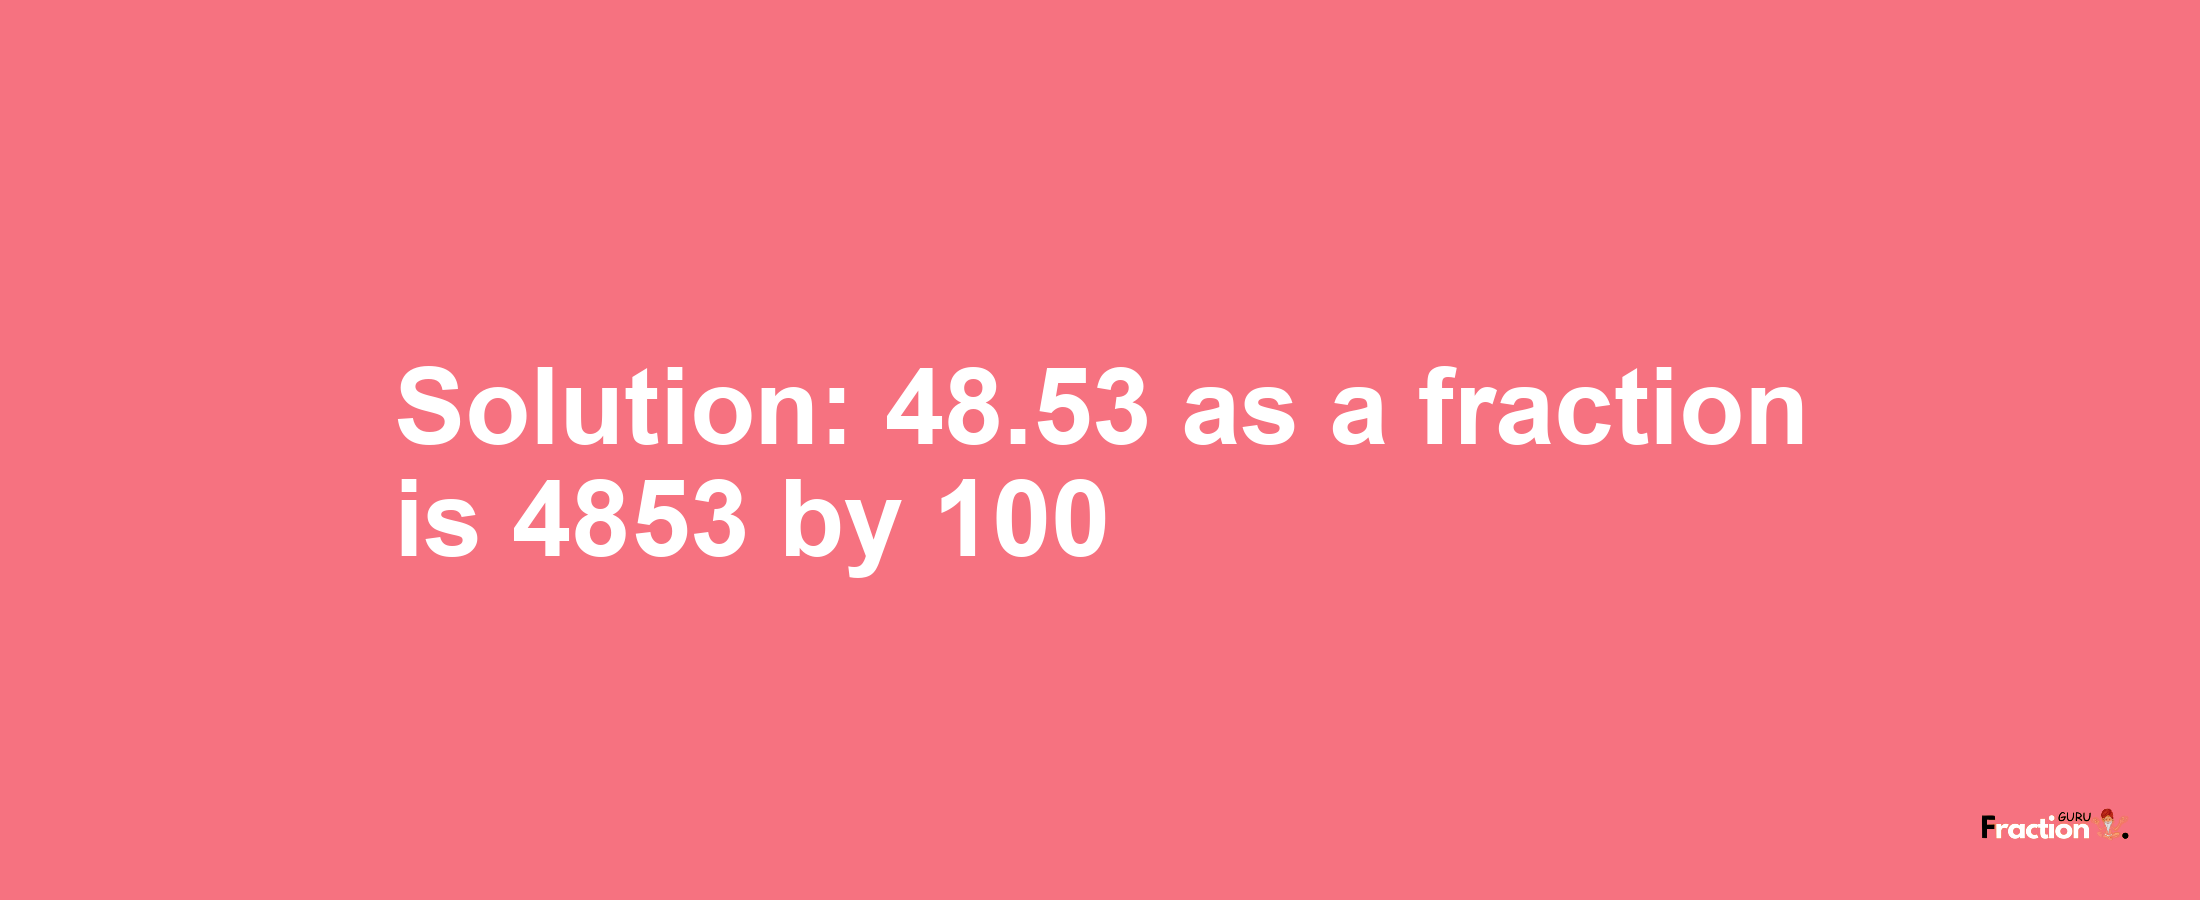 Solution:48.53 as a fraction is 4853/100